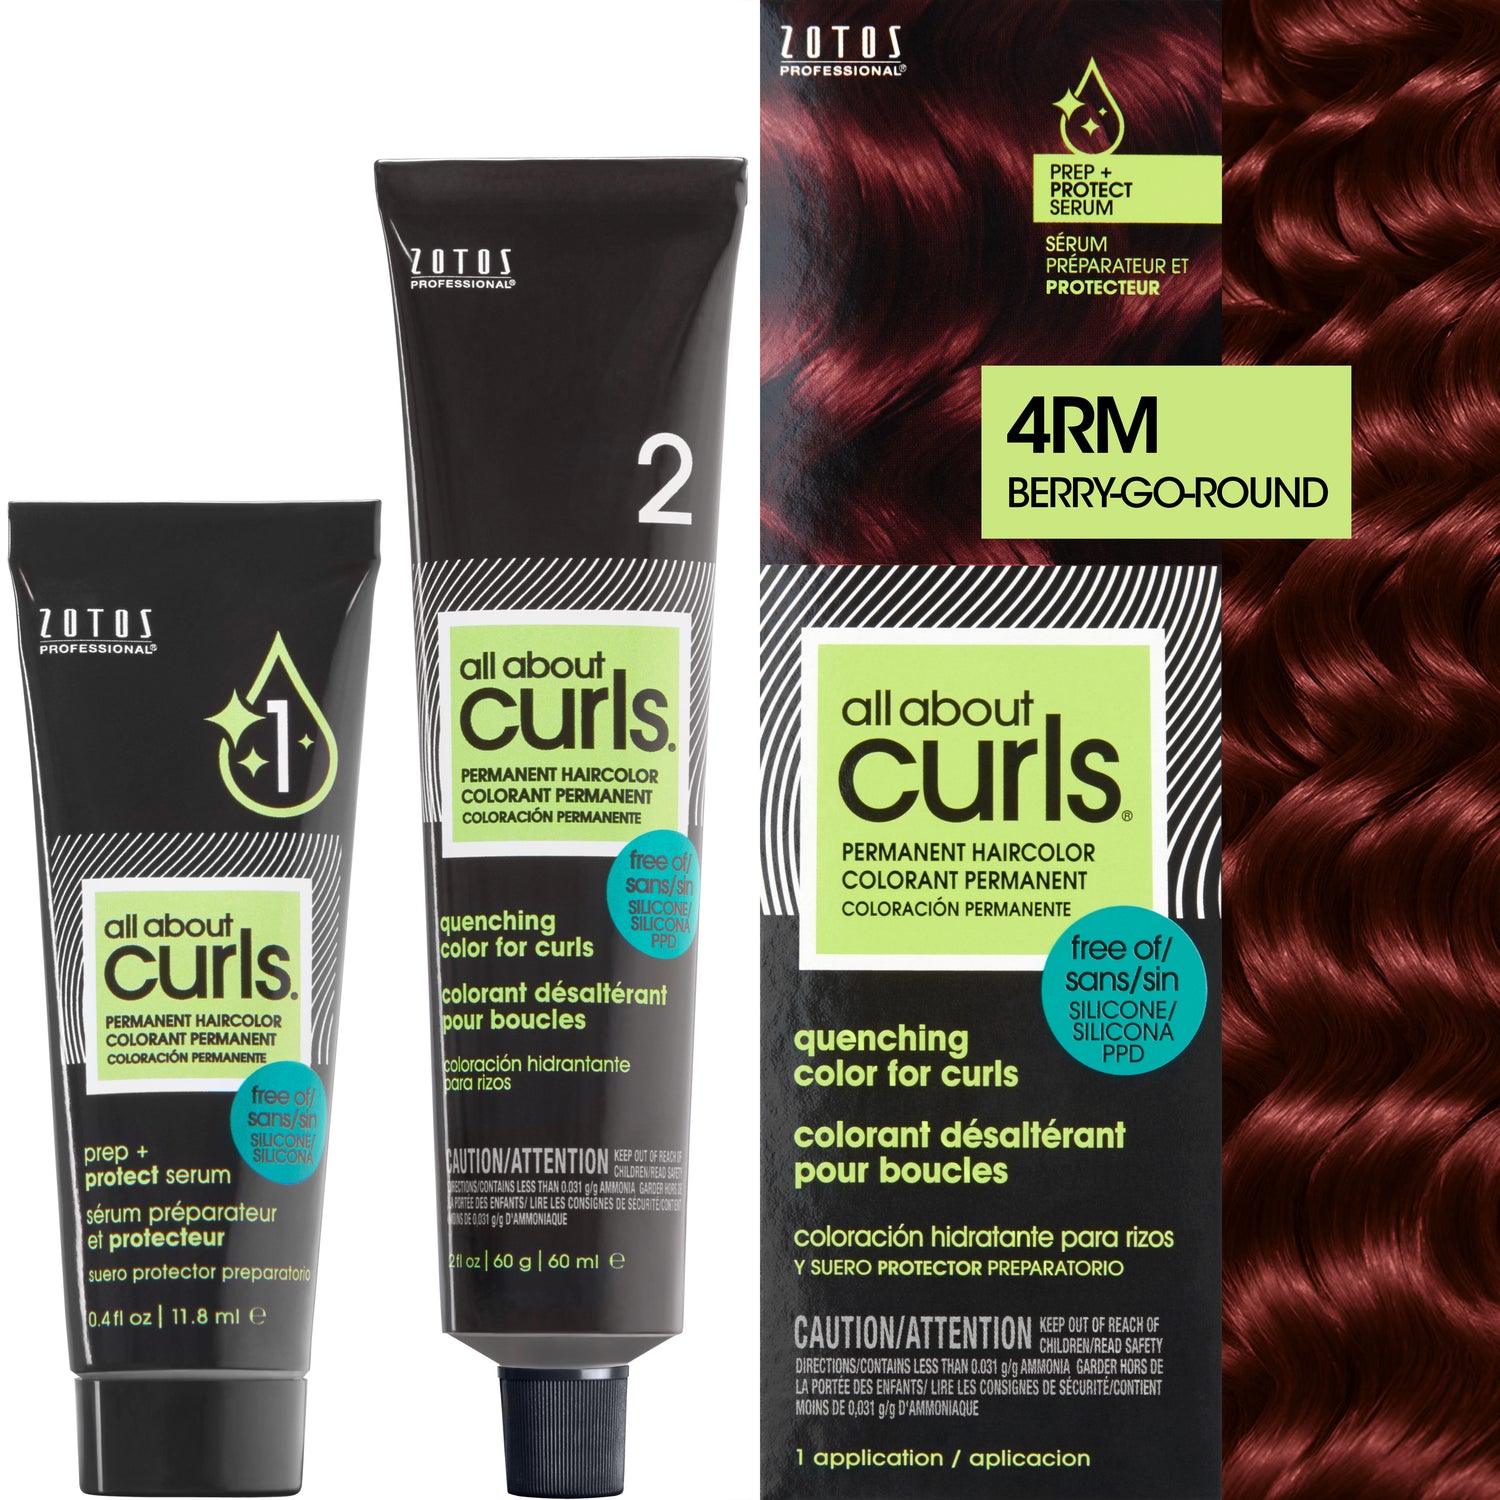 Two bottles and packaging for All About Curls Permanent Color in shade 4RM Berry-Go-Round.